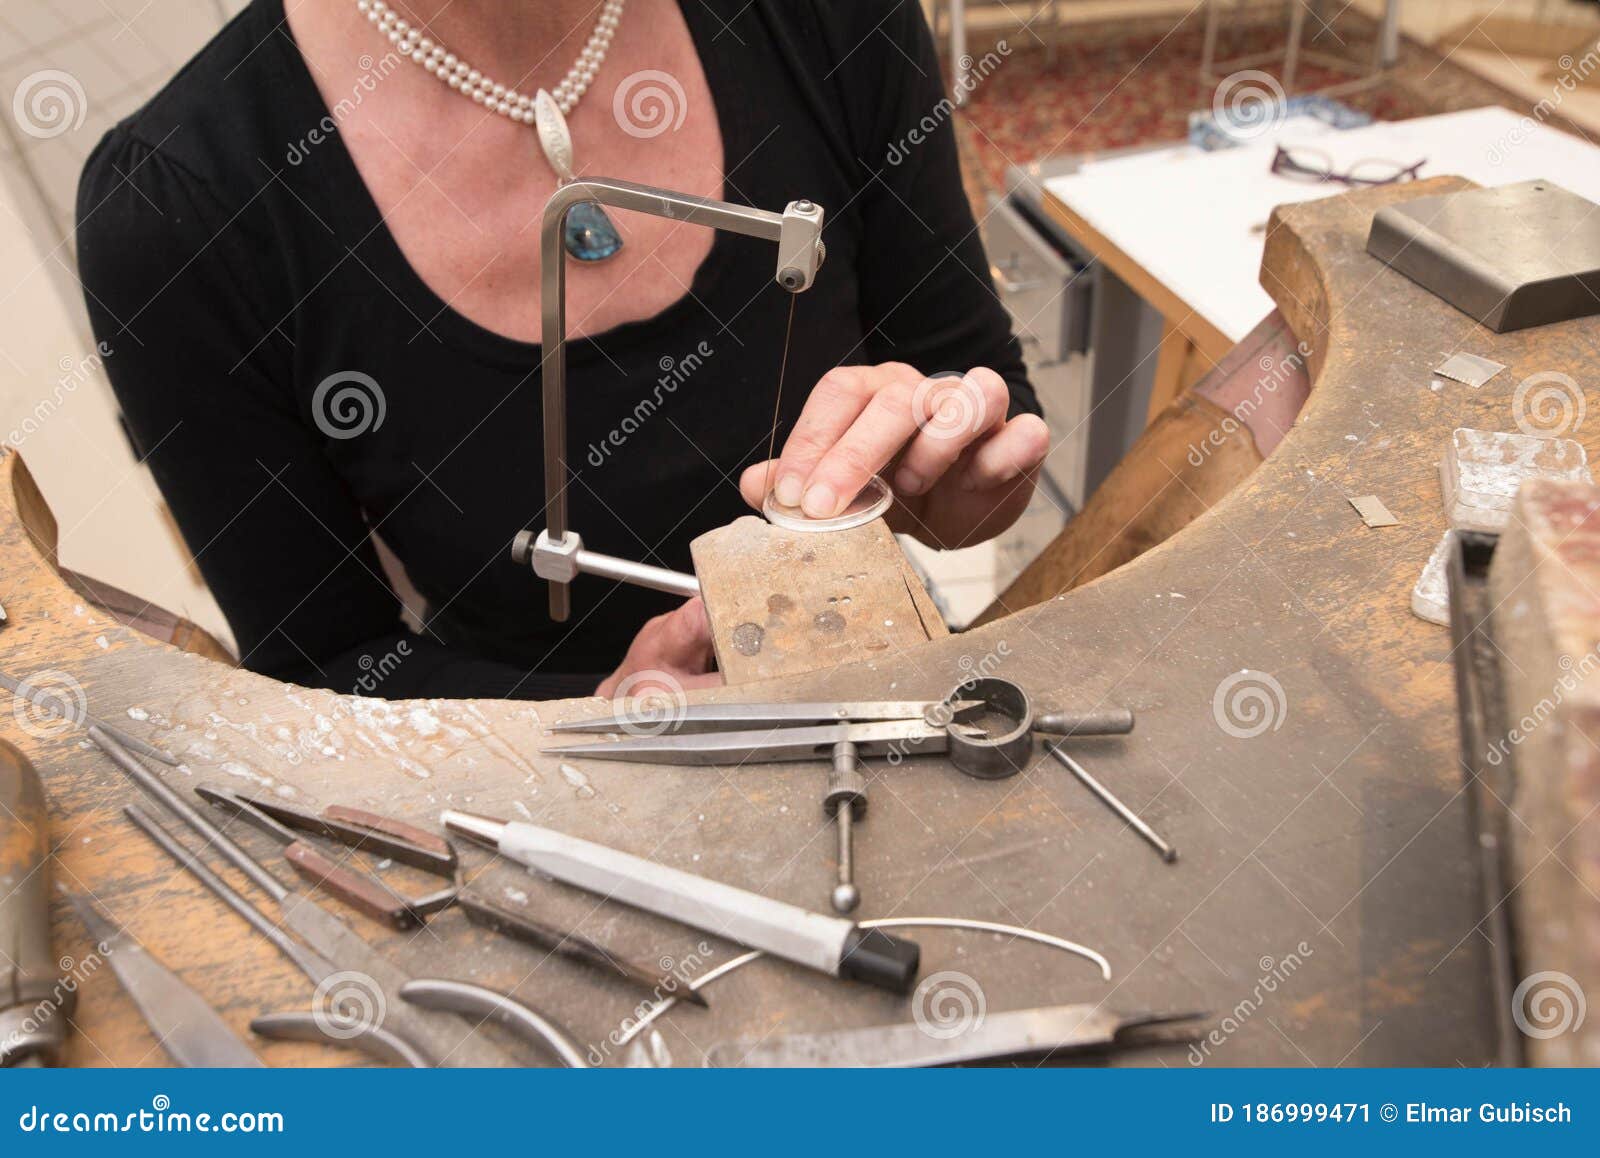 gold and silversmith at work